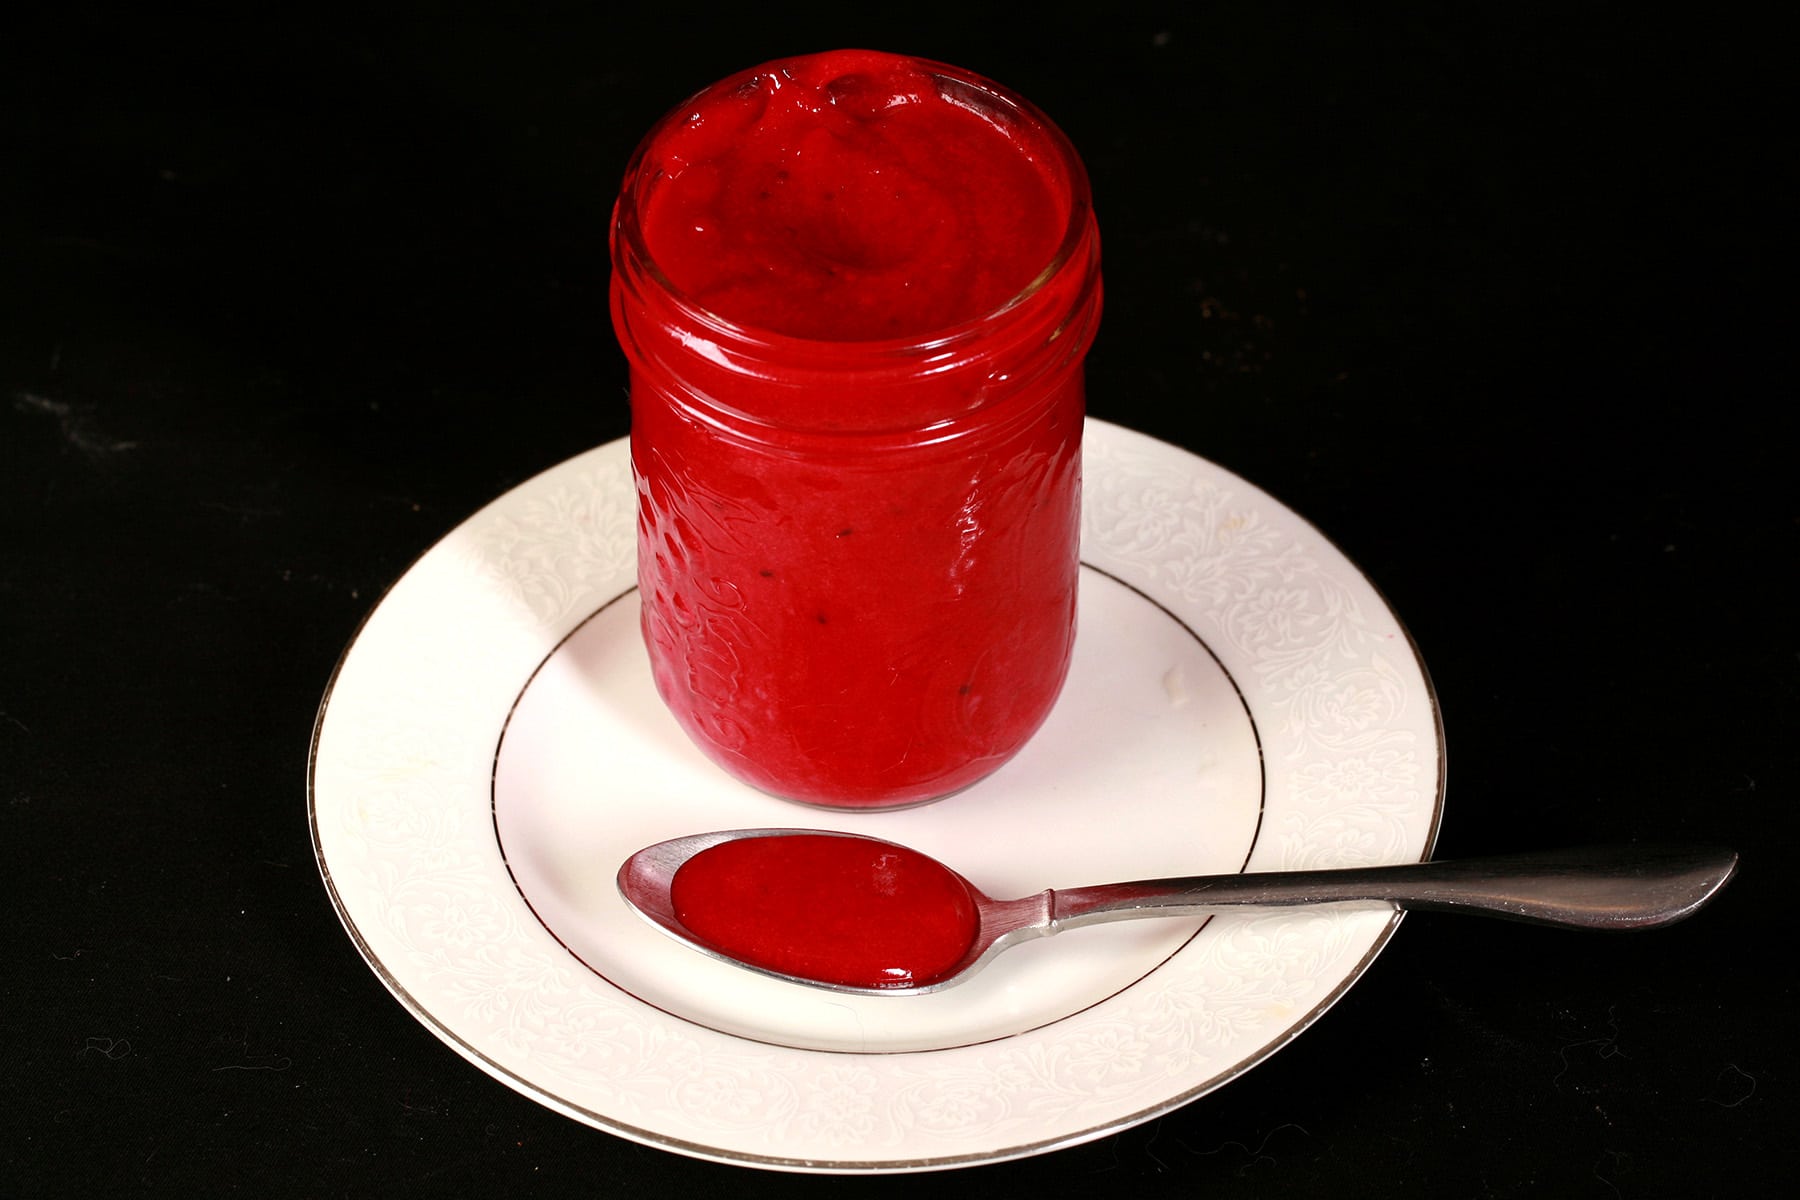 A jar of blackcurrant curd on a plate, along with a spoon of the curd.